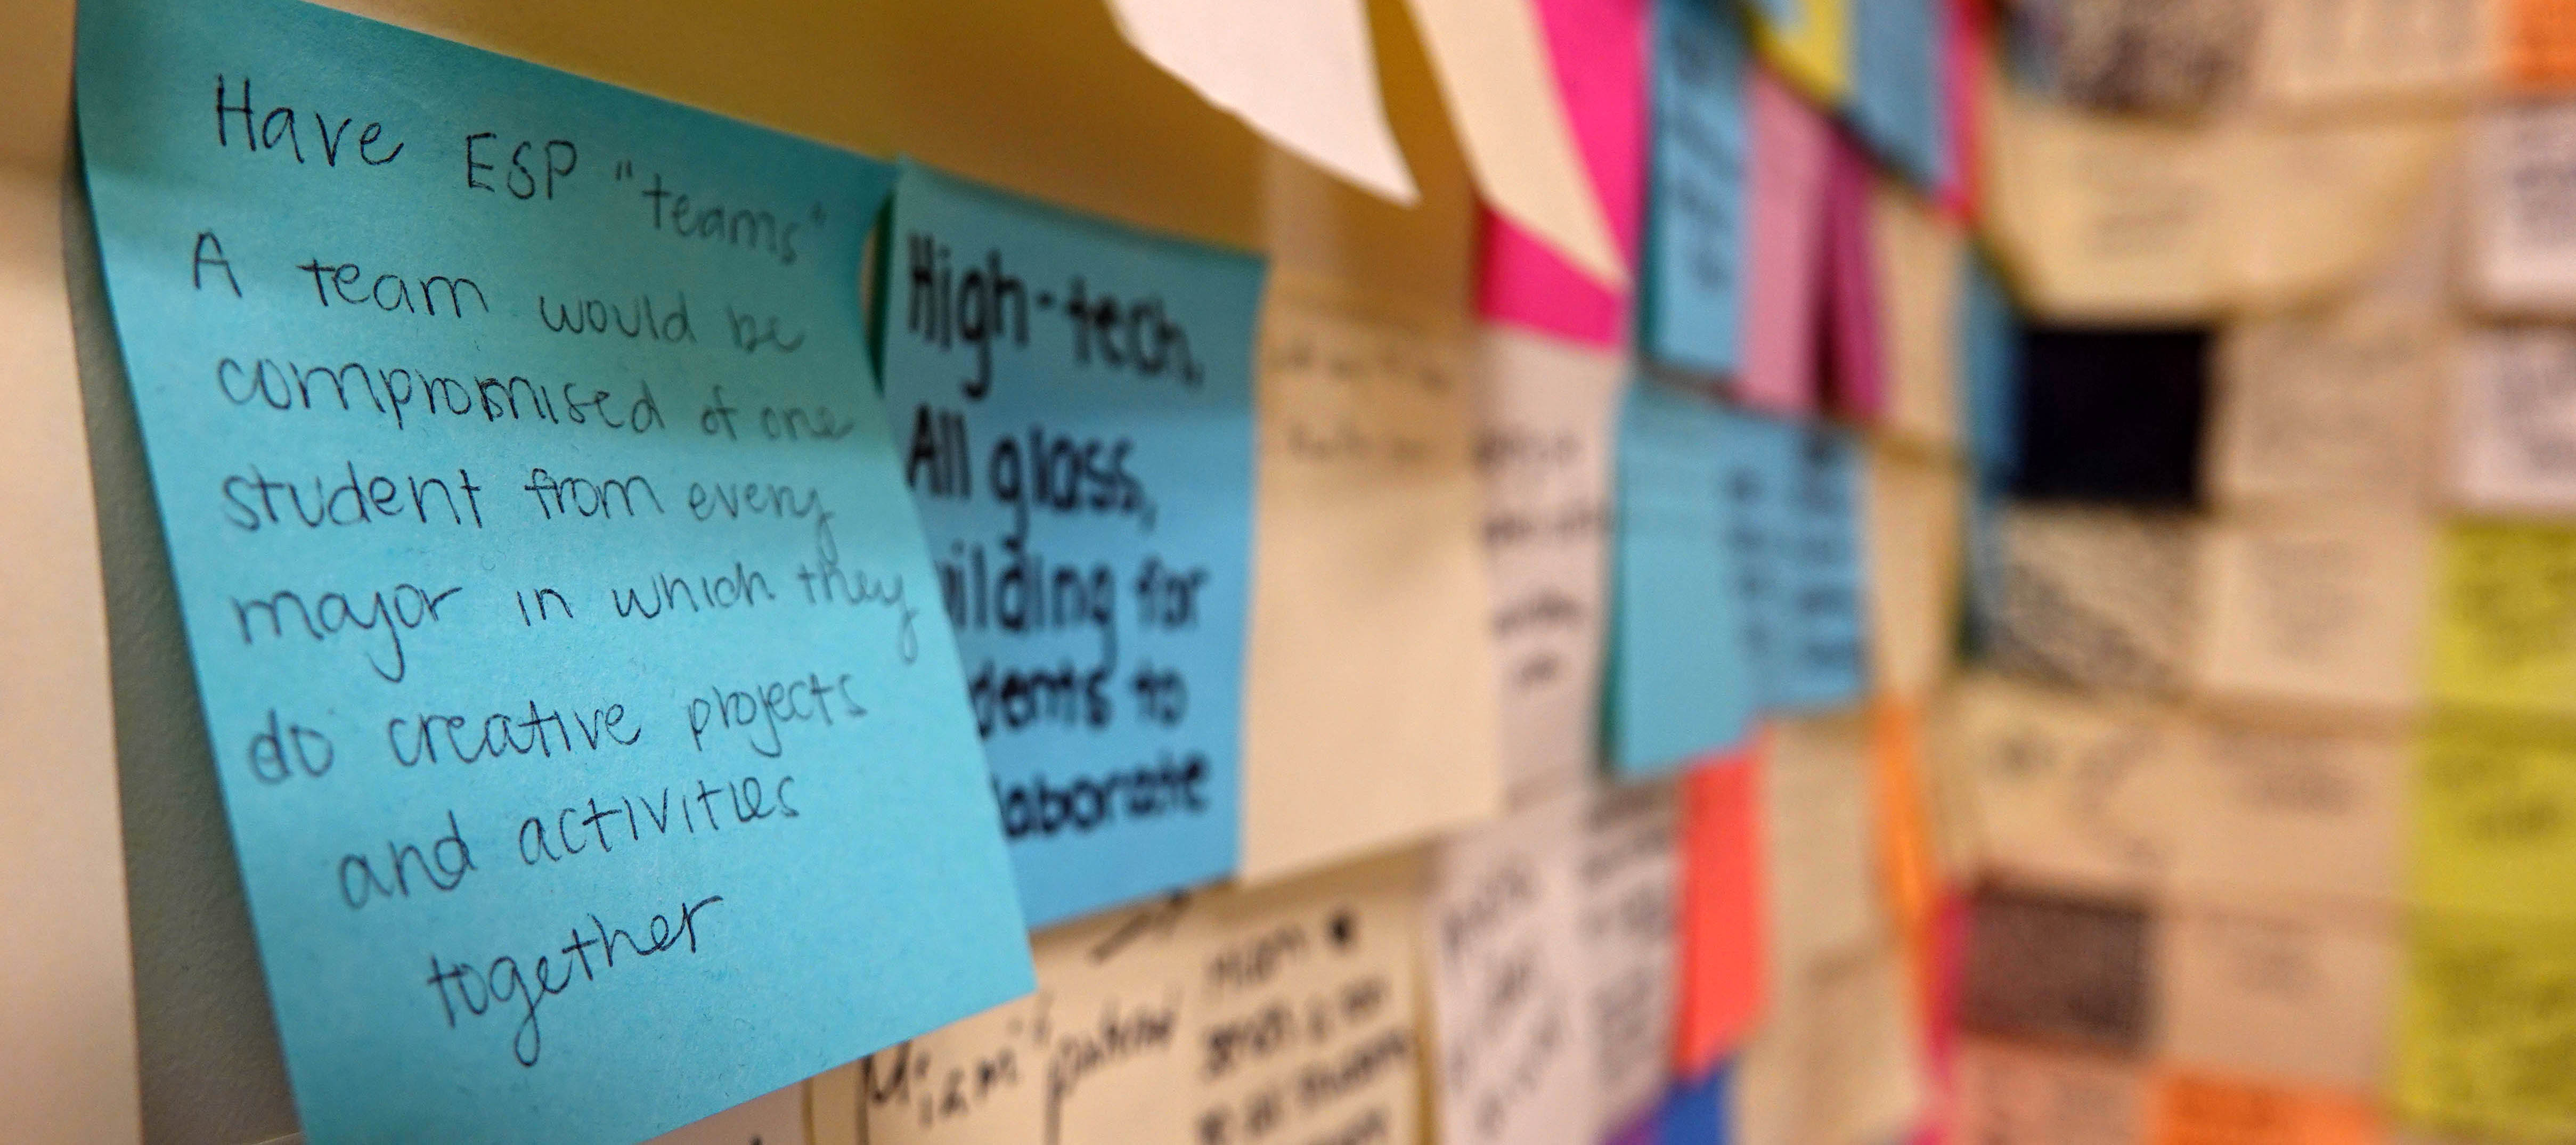  Sticky notes covering David Eyman's office walls